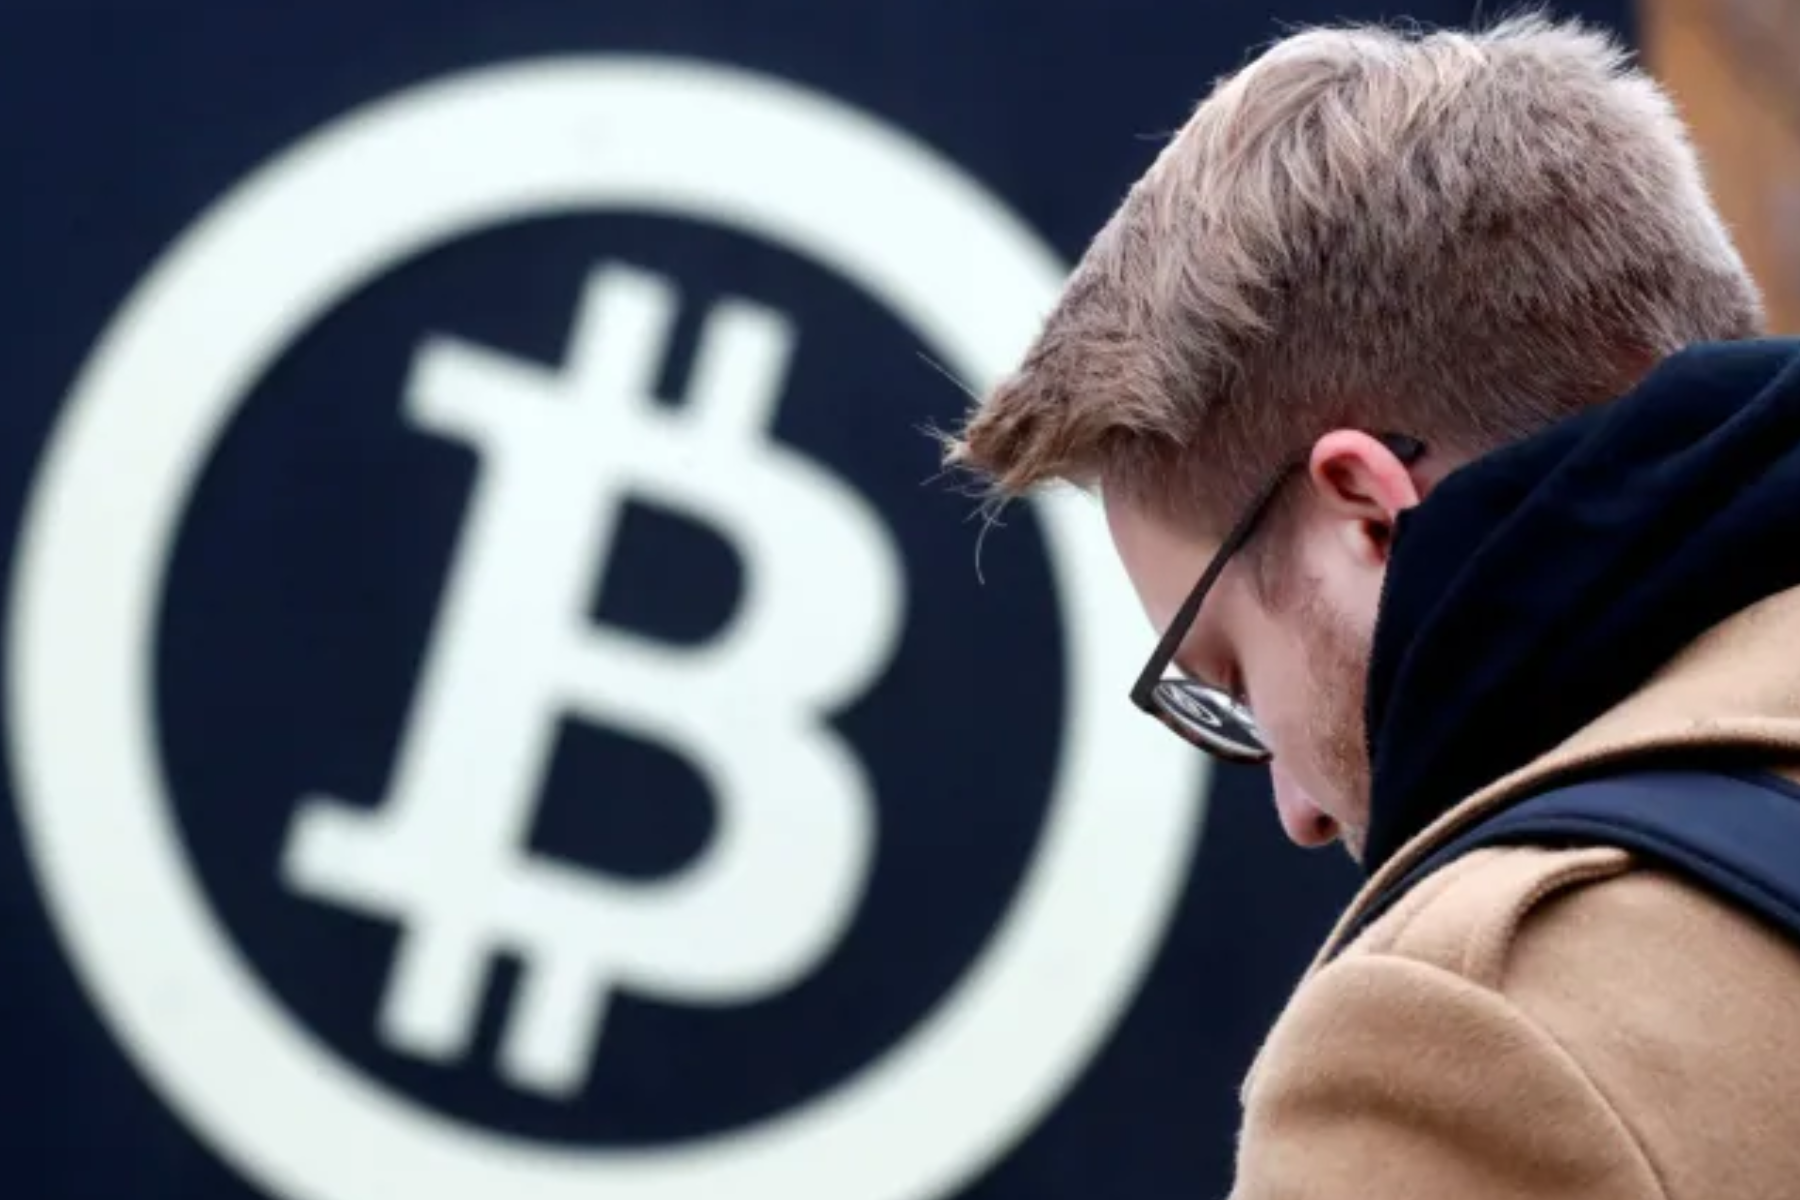 A person standing in front of a logo with the word "Bitcoin" written on it